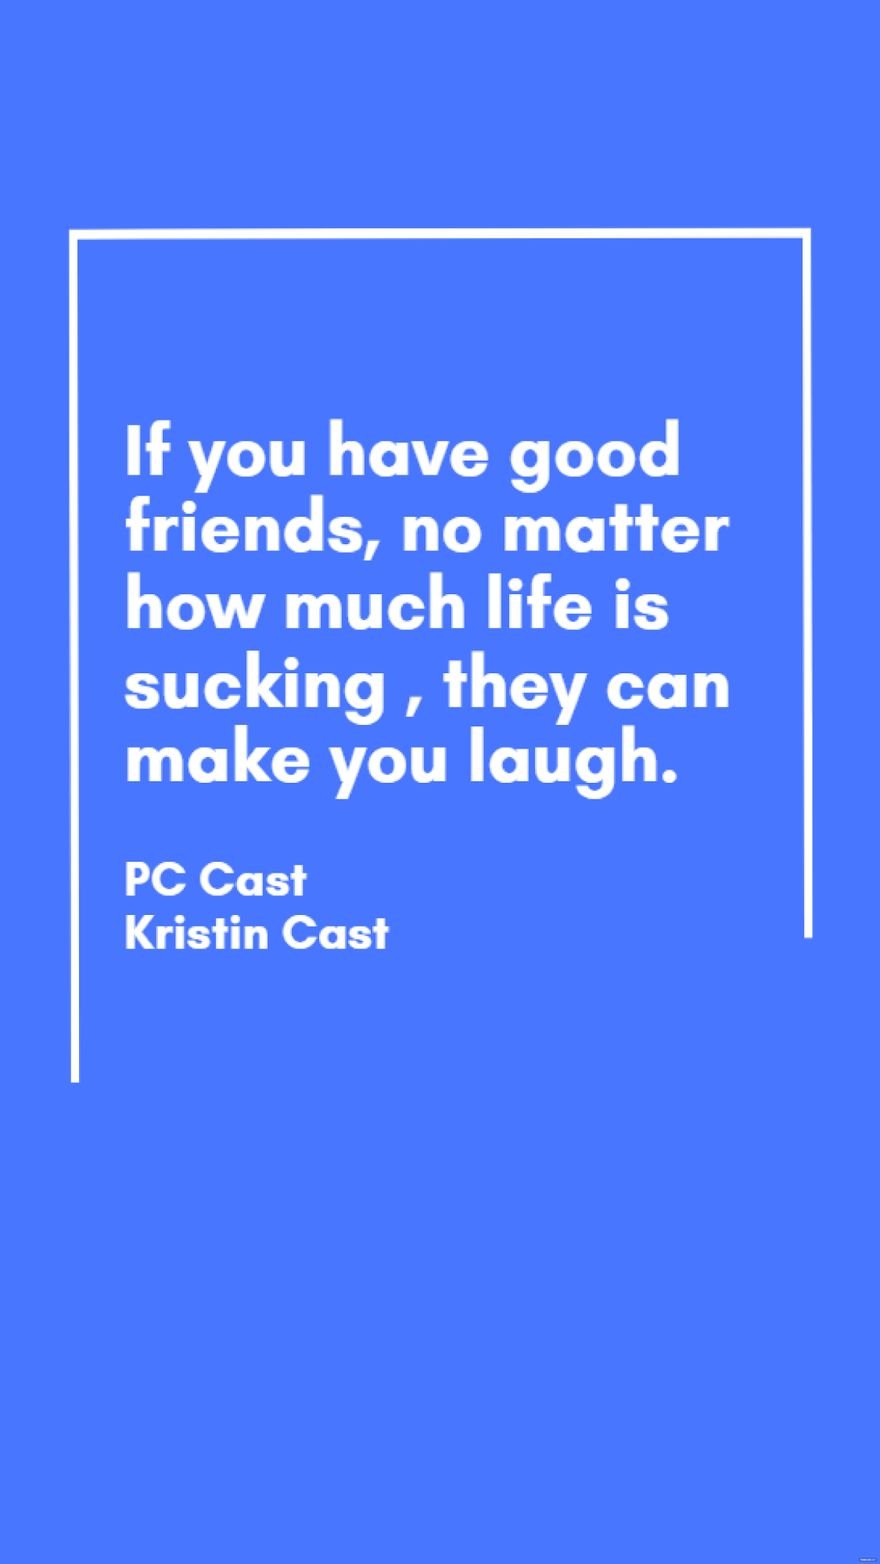 PC Cast Kristin Cast - If you have good friends, no matter how much life is sucking , they can make you laugh.